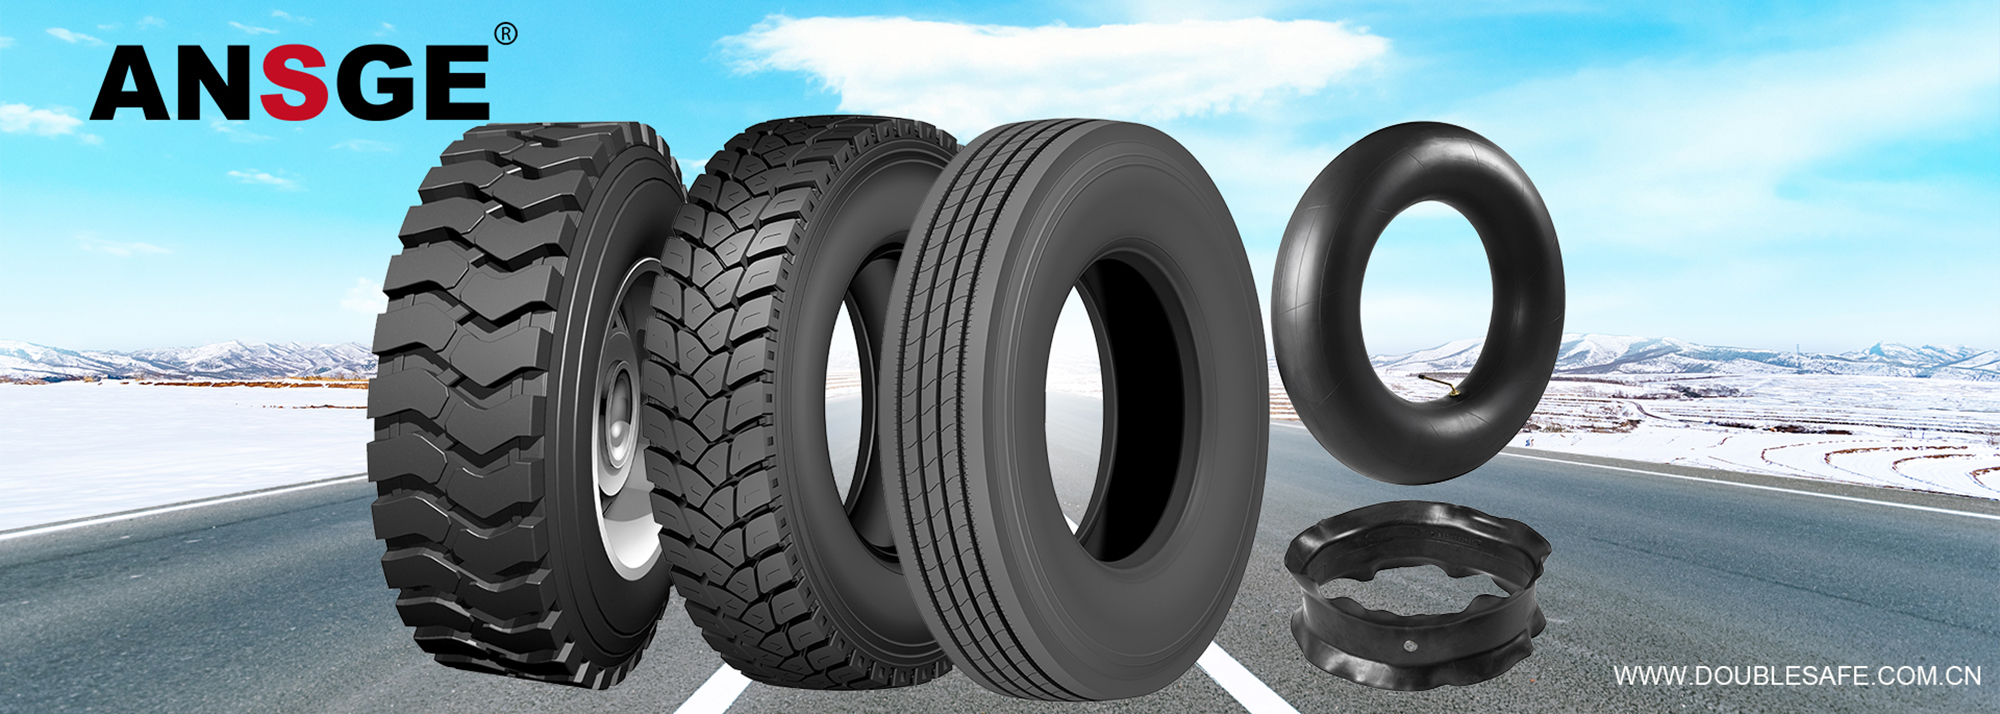 Double Safe and ANSGE brand tires, tubes, flaps